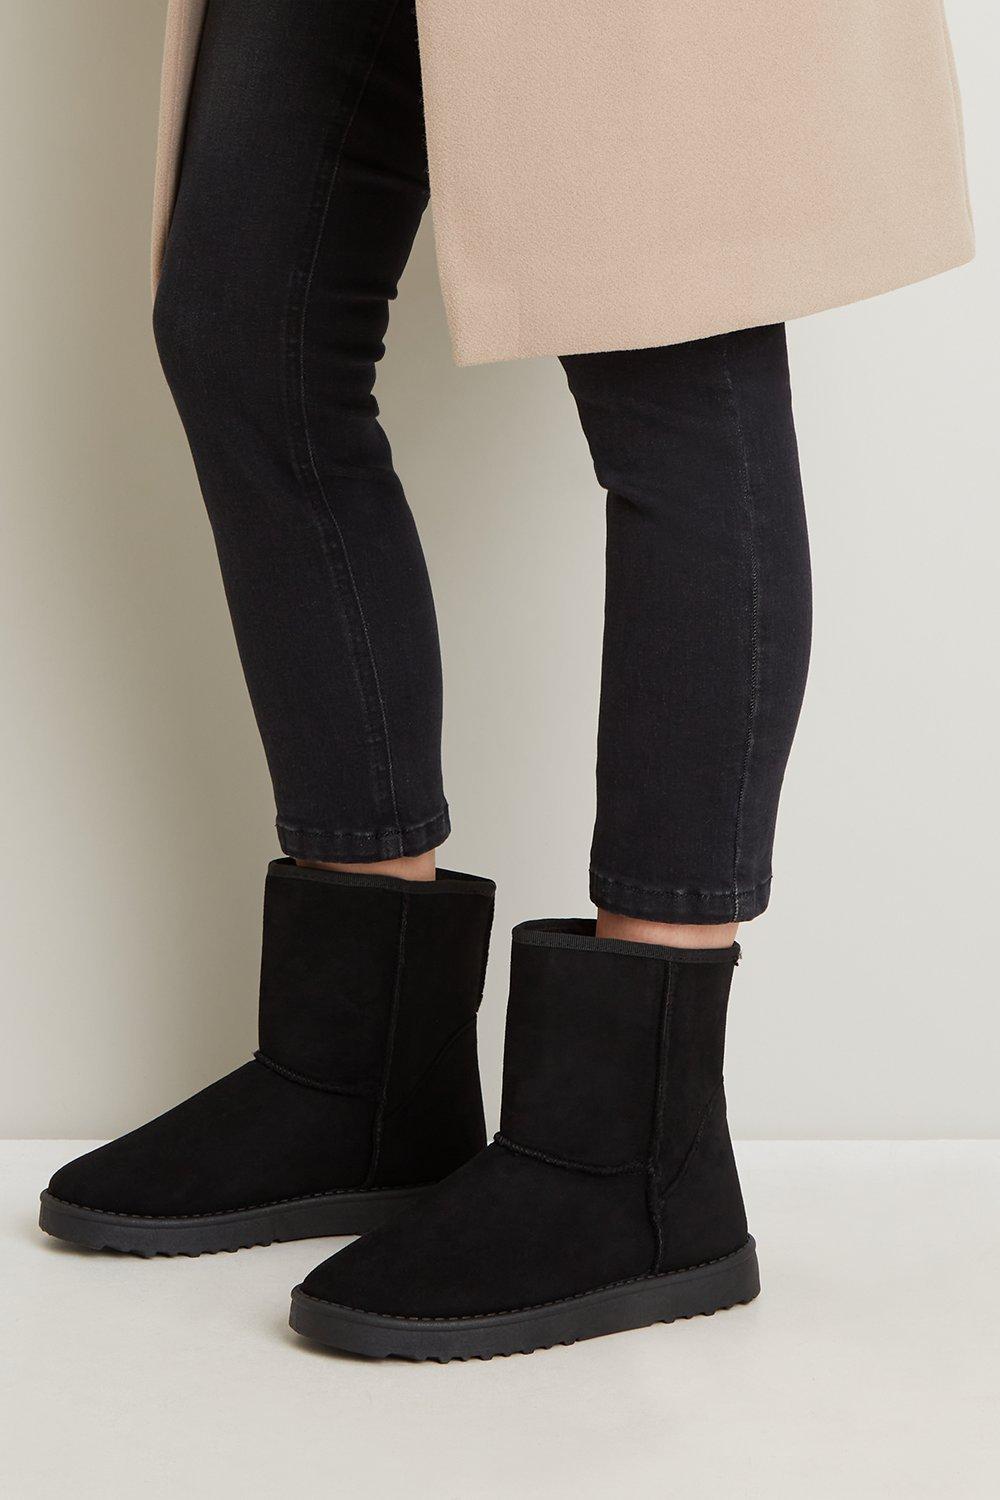 black suede fur lined ankle boots